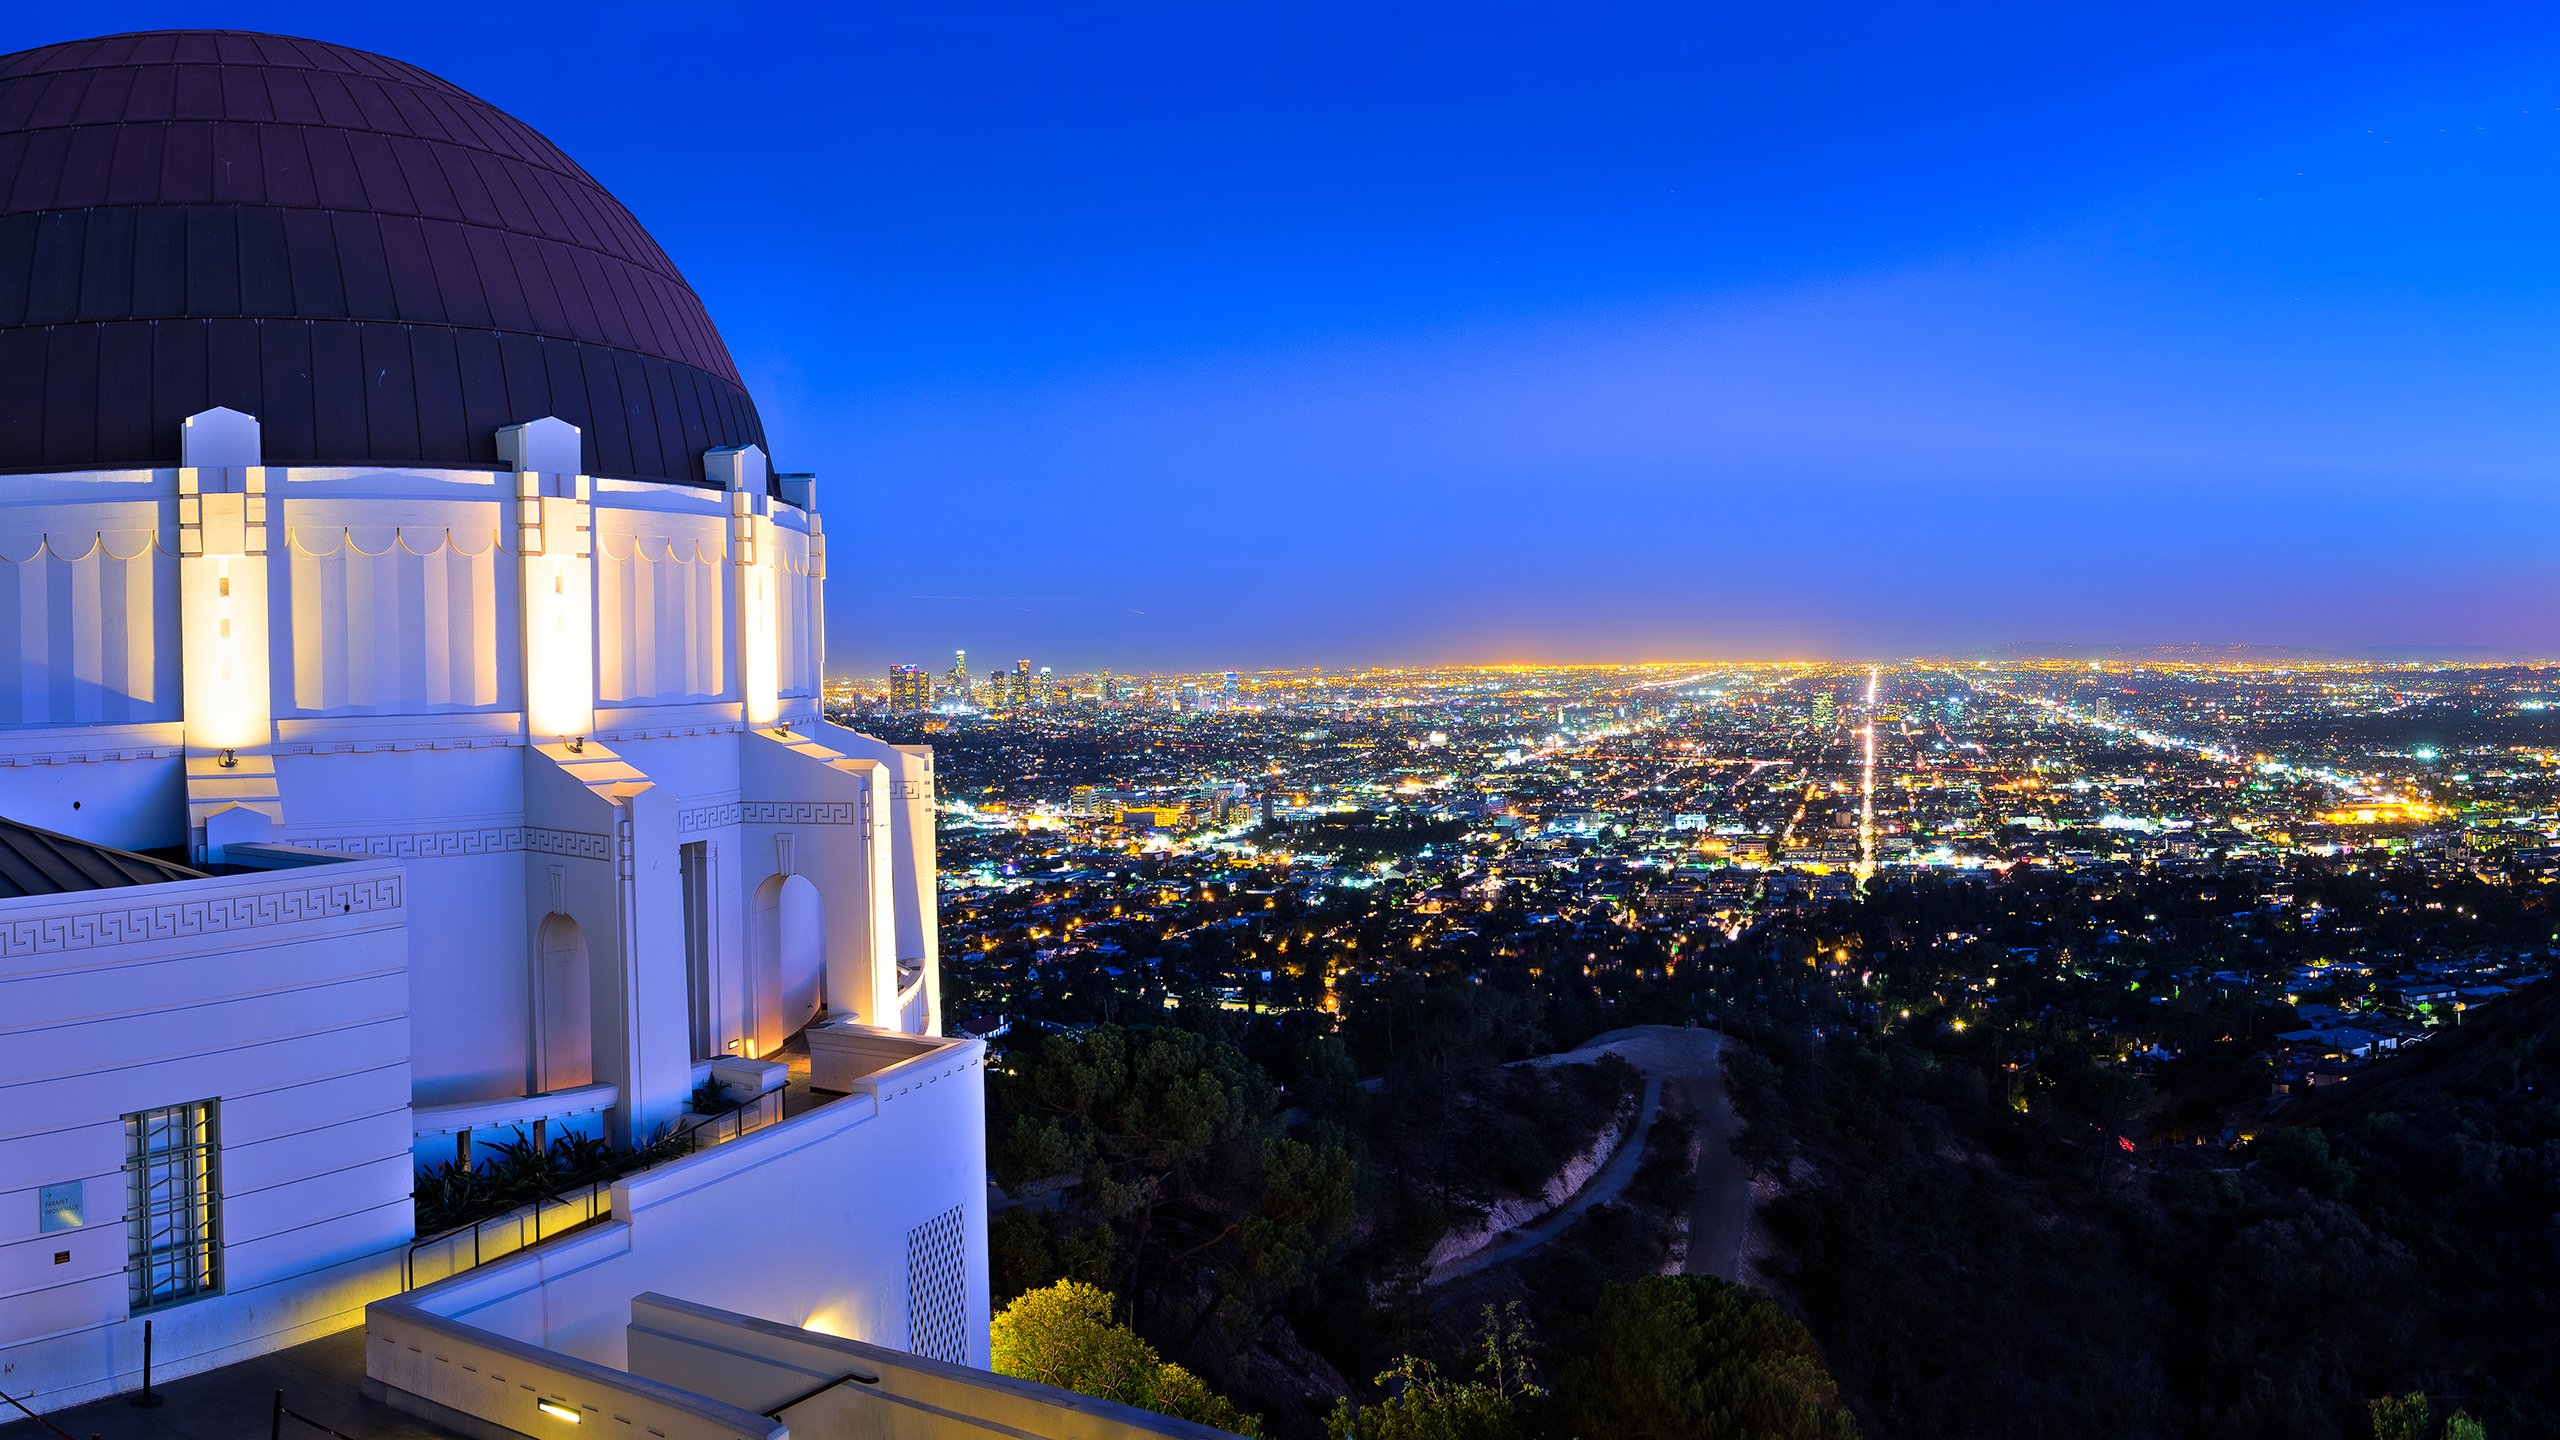 los, Angeles, Buildings, Skyscrapers, Griffith, Park, Observatory, Night, Lights Wallpaper